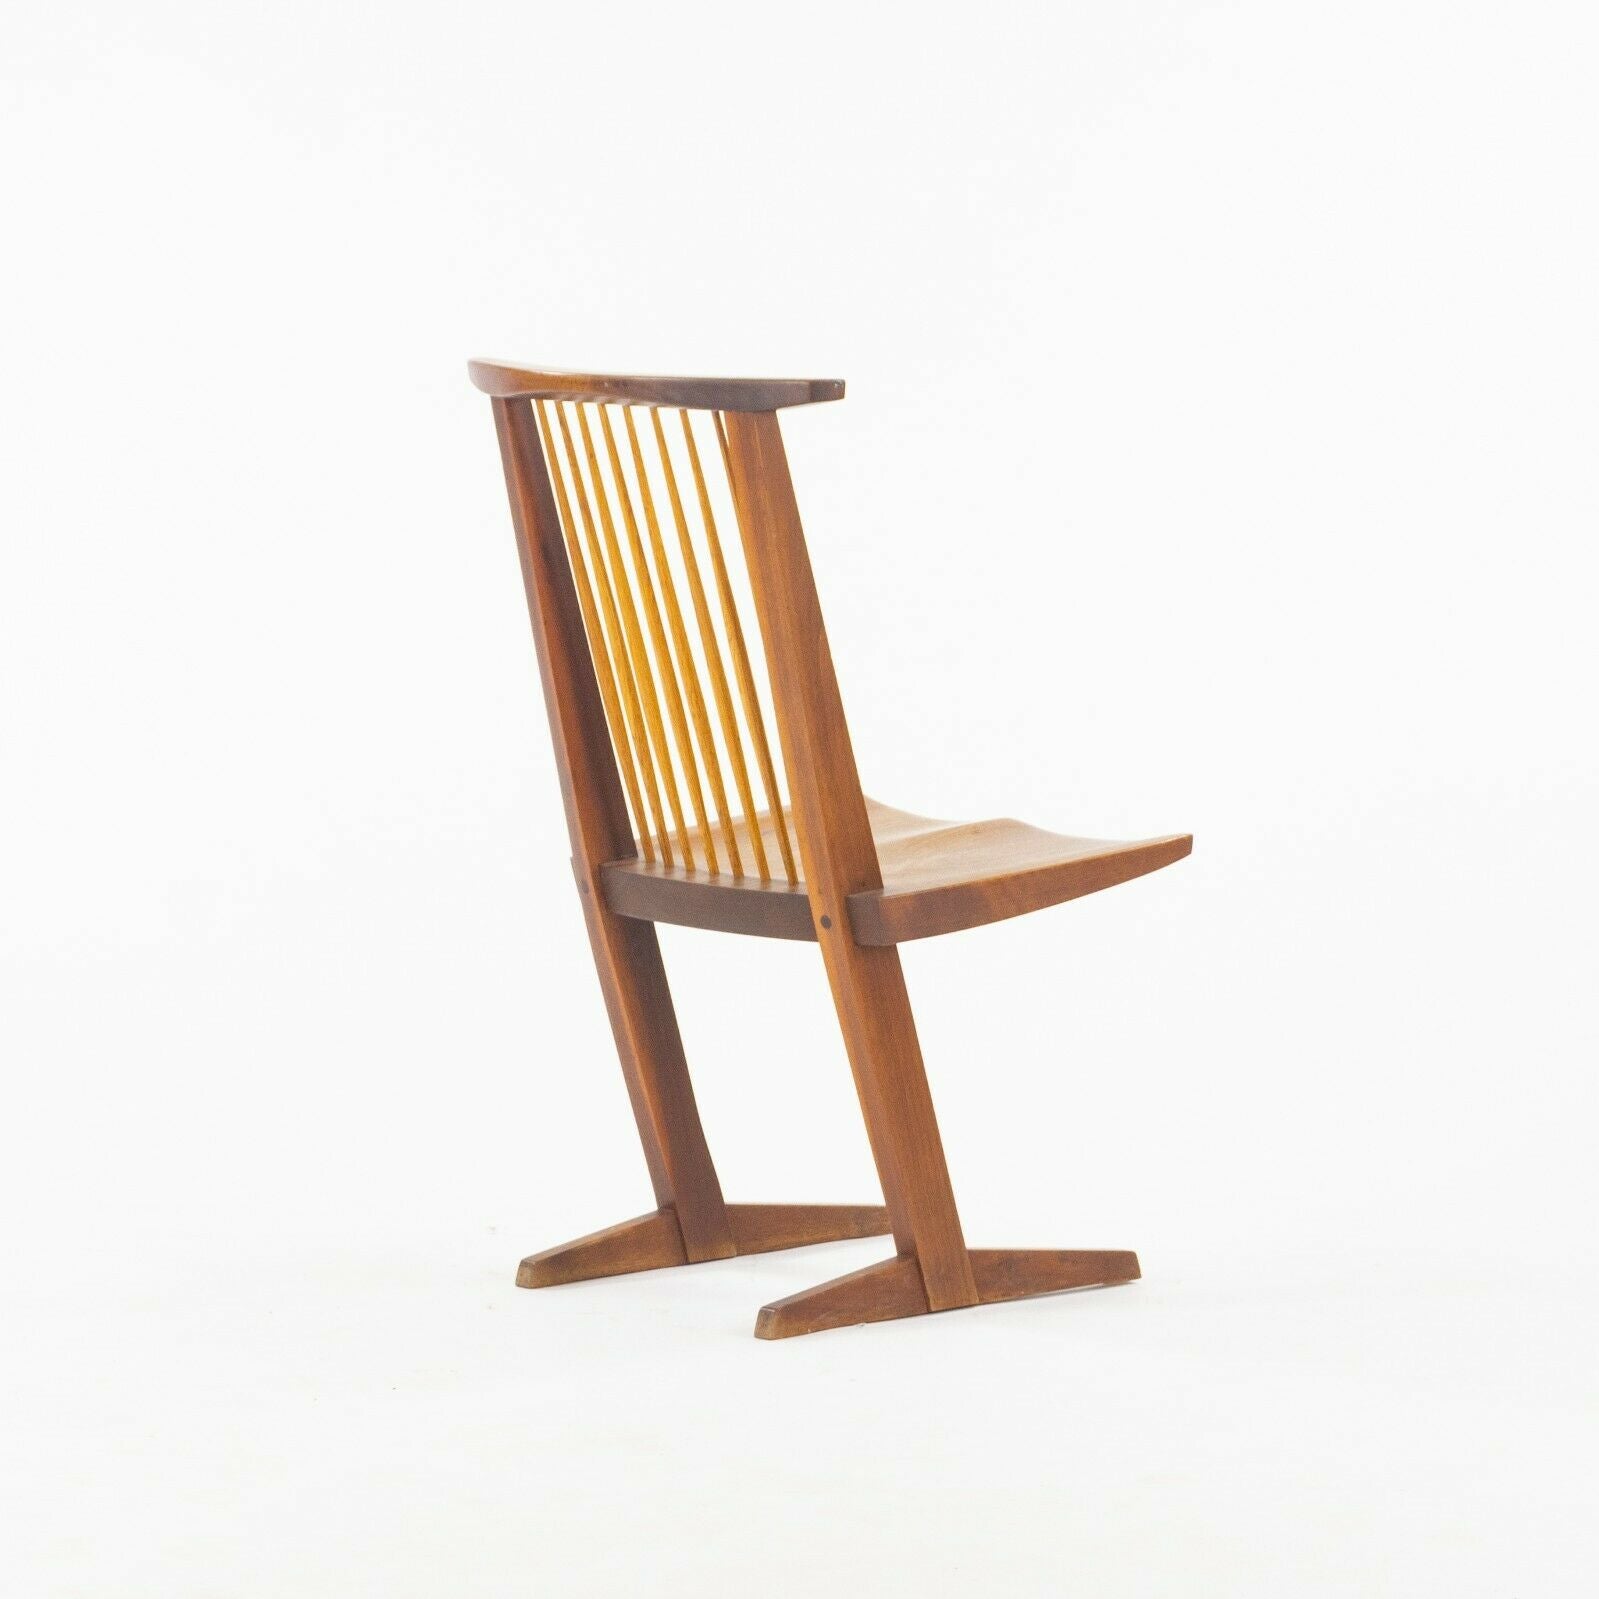 SOLD 1964 Original George Nakashima Conoid Dining / Side Chair in PA Black Walnut